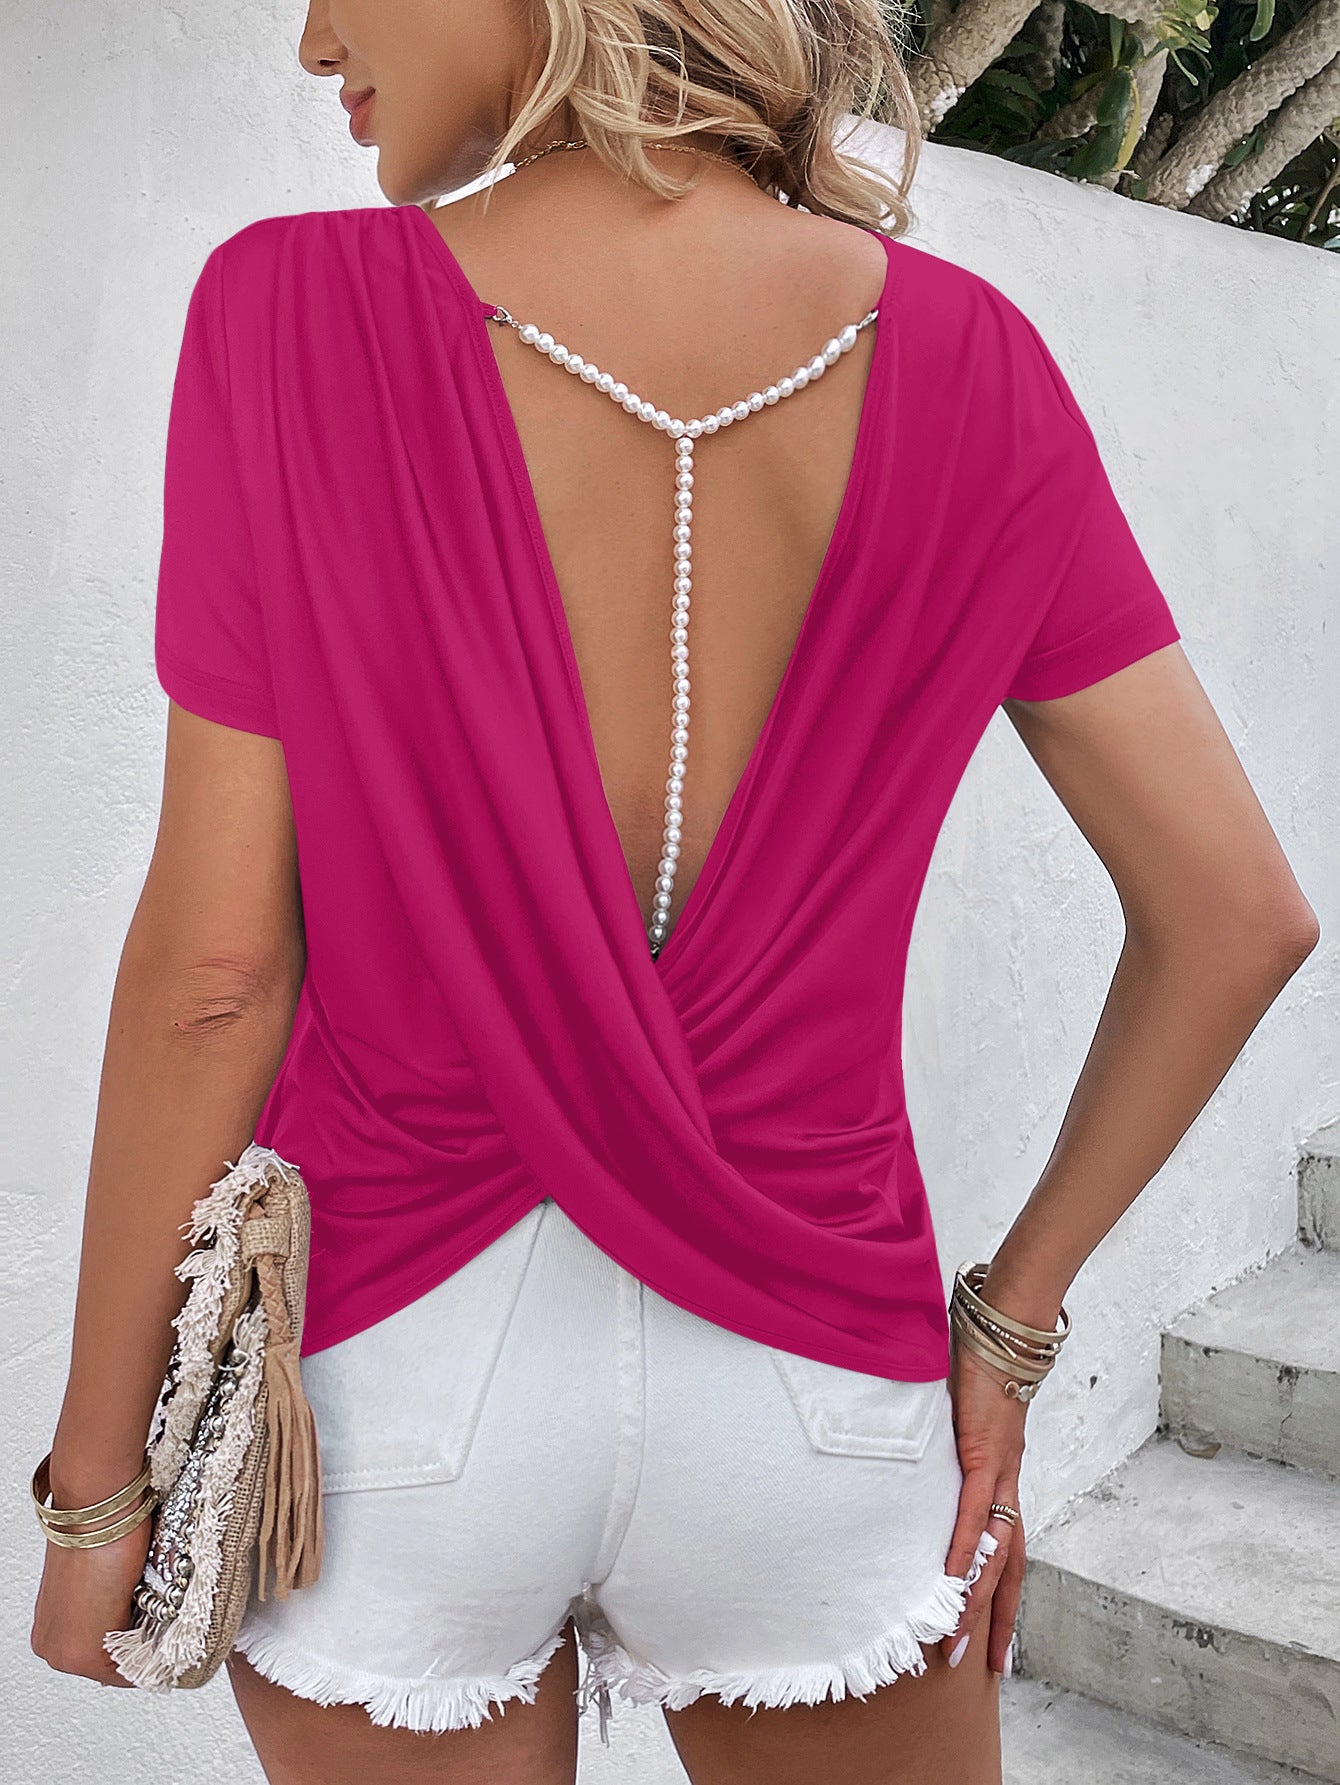 Barbie Style Beads Trim Back Twisted Blouse